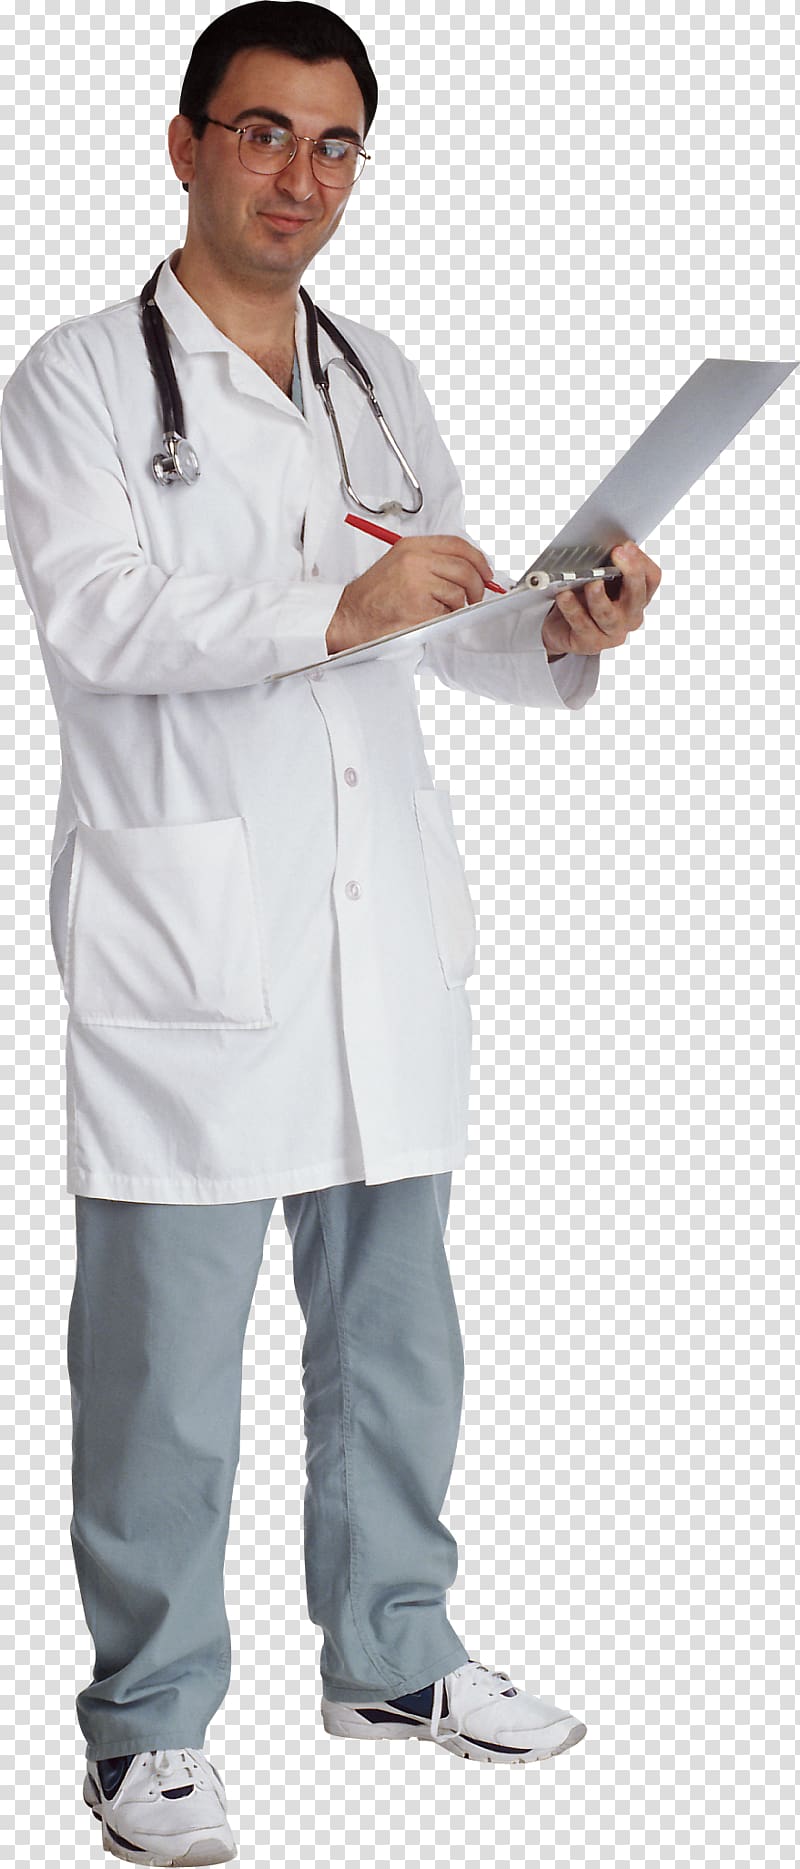 man holding gray clipboard, Physician Icon World Organization of Family Doctors Computer file, Doctor transparent background PNG clipart